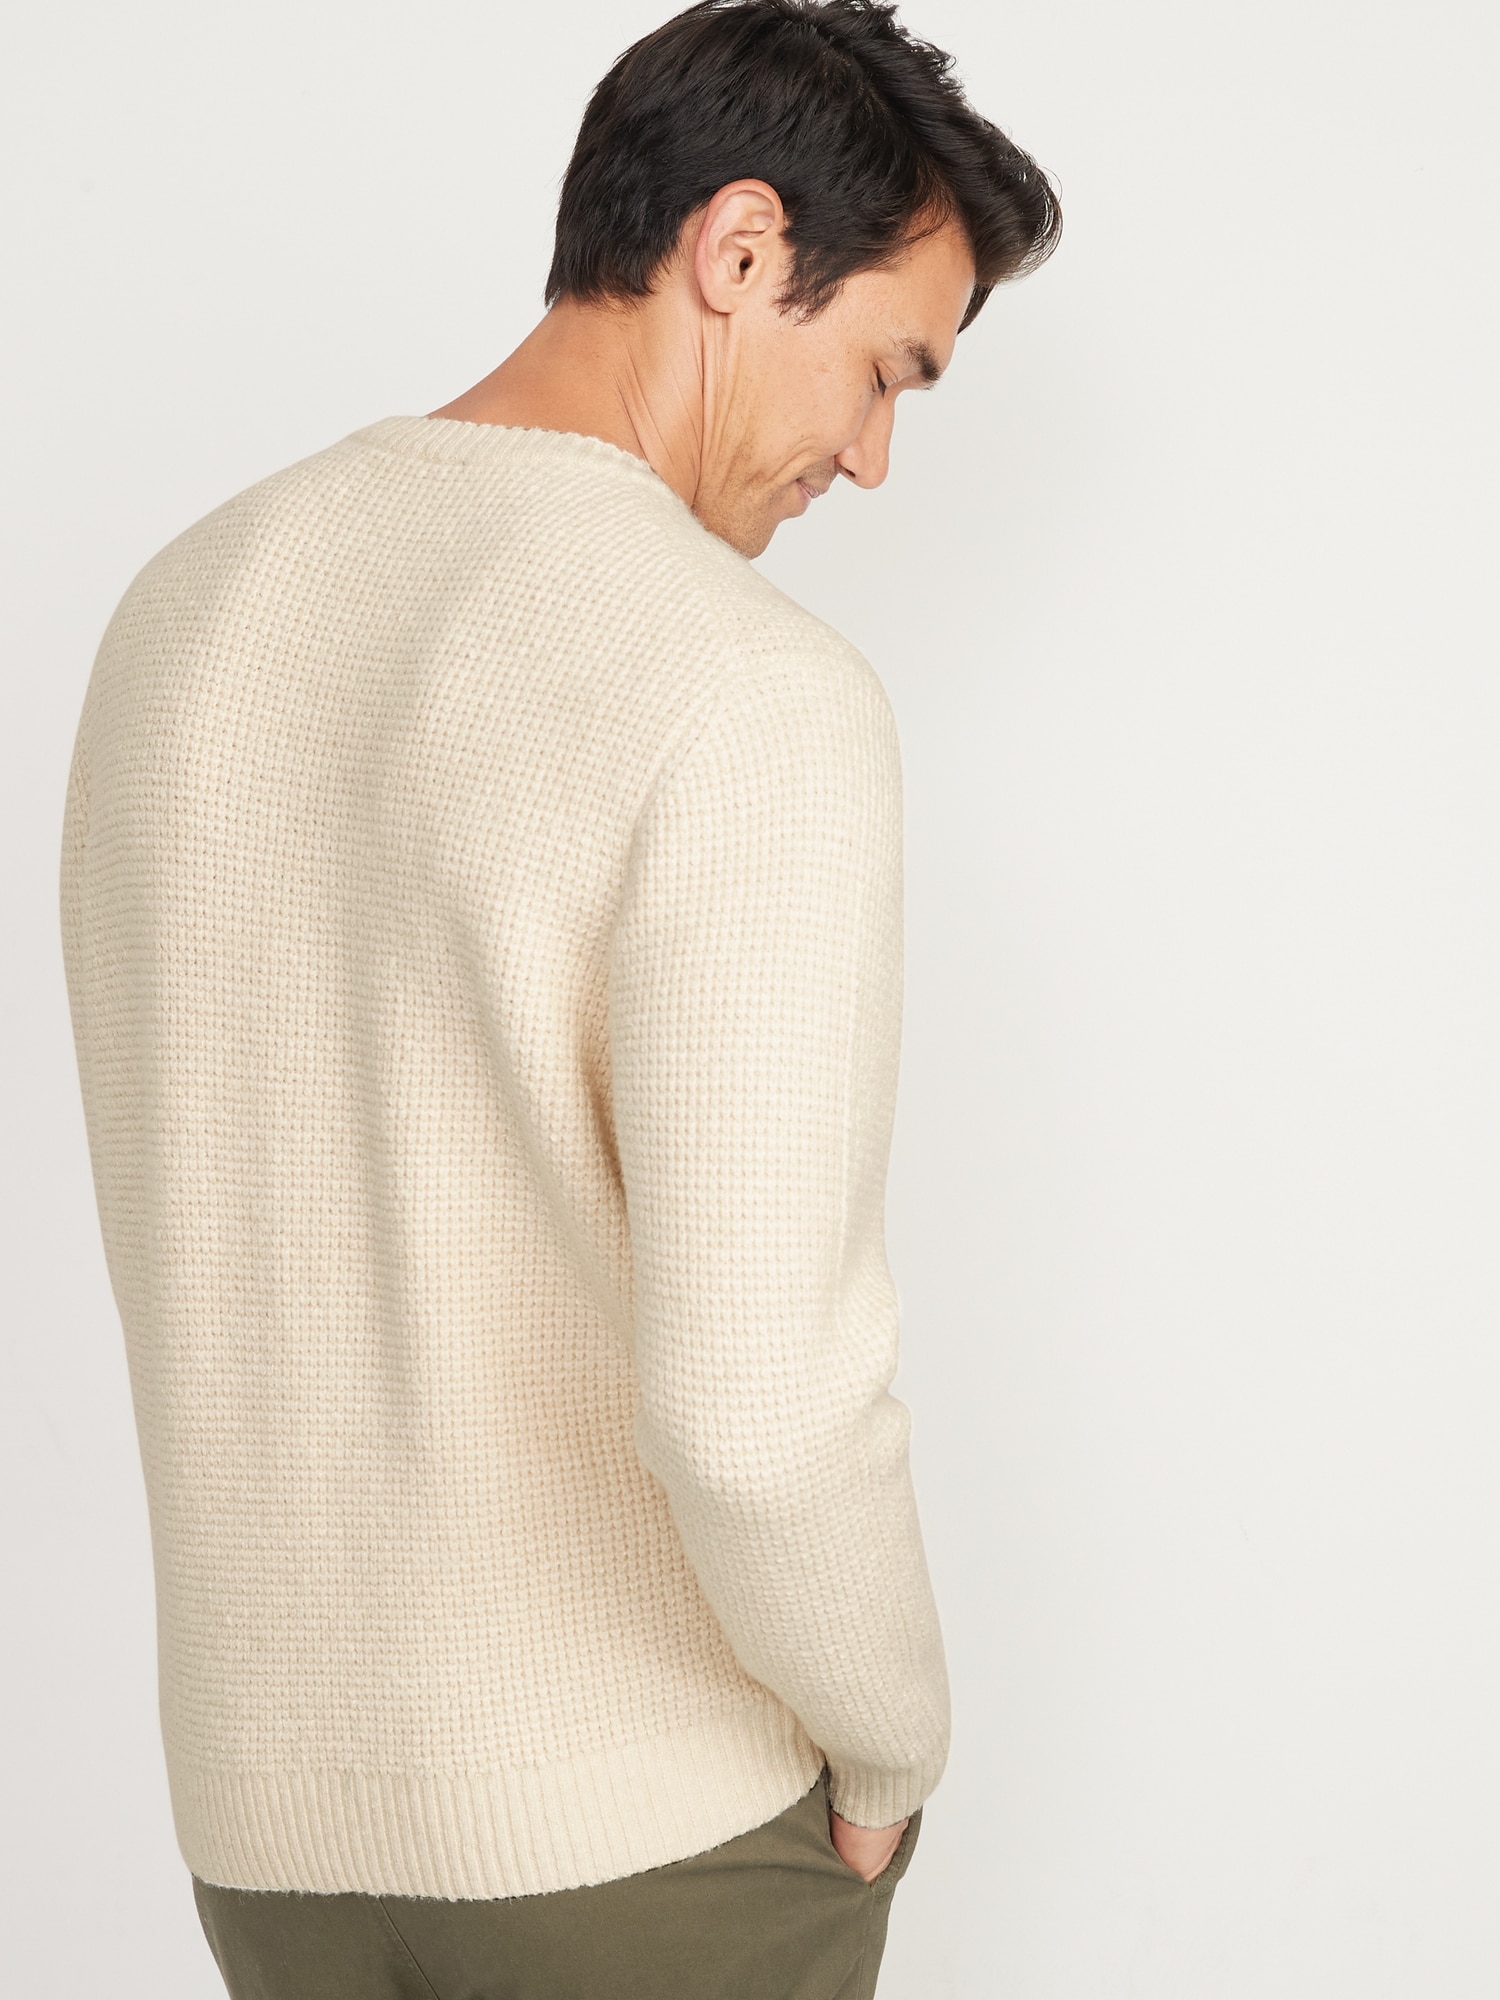 Textured Waffle-Knit Crew-Neck Sweater for Men